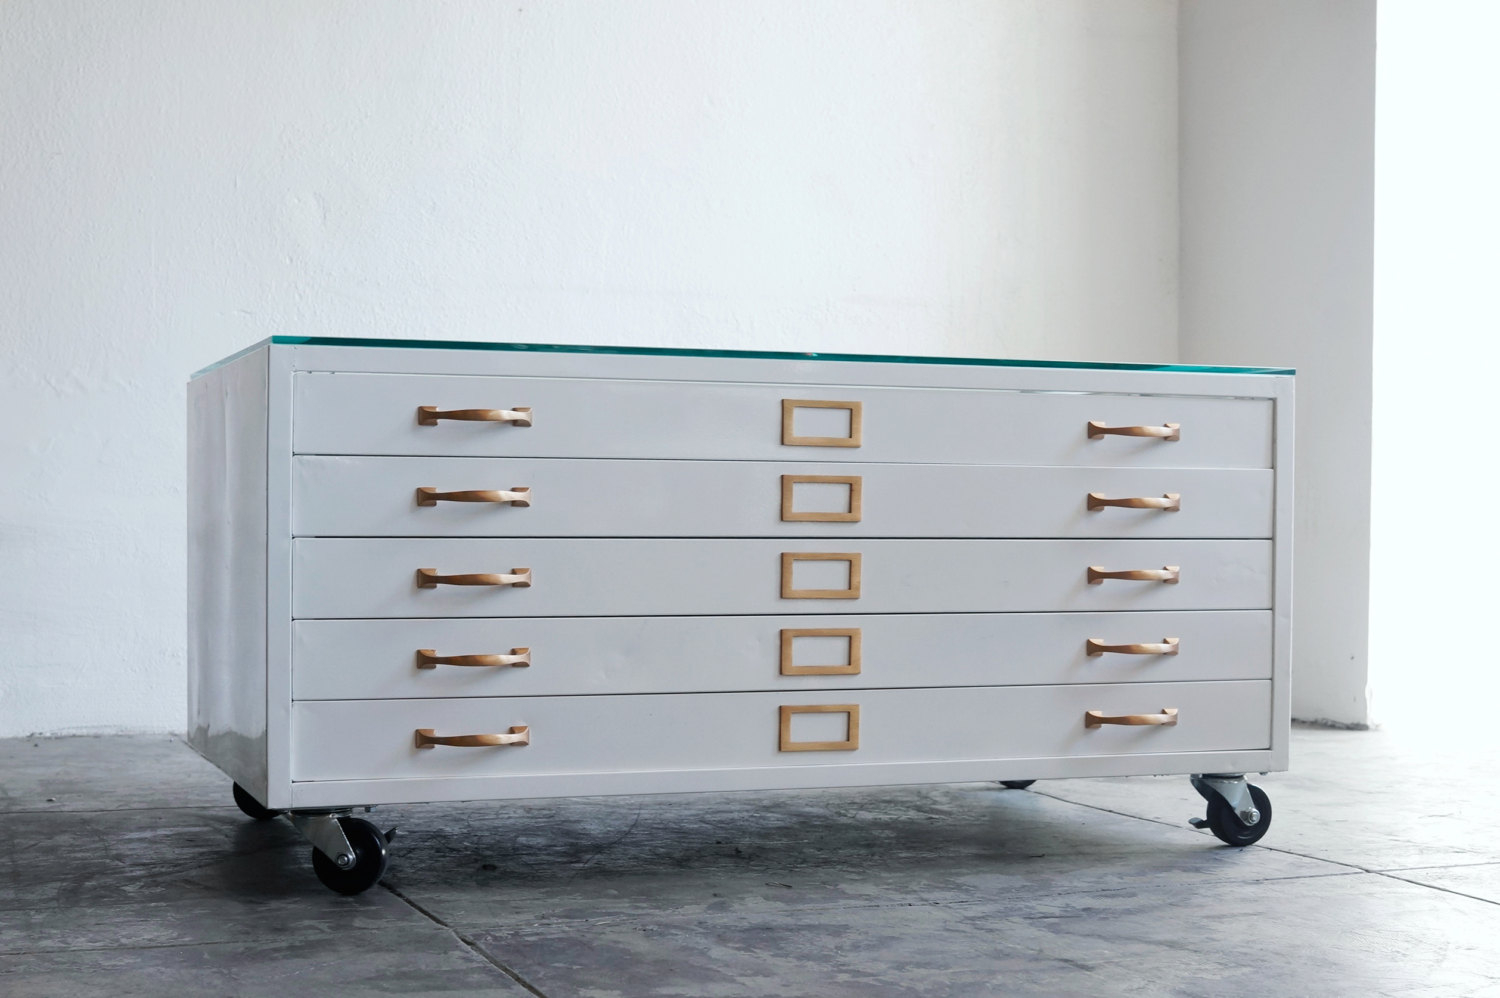 We refinished this vintage architects flat file cabinet for use